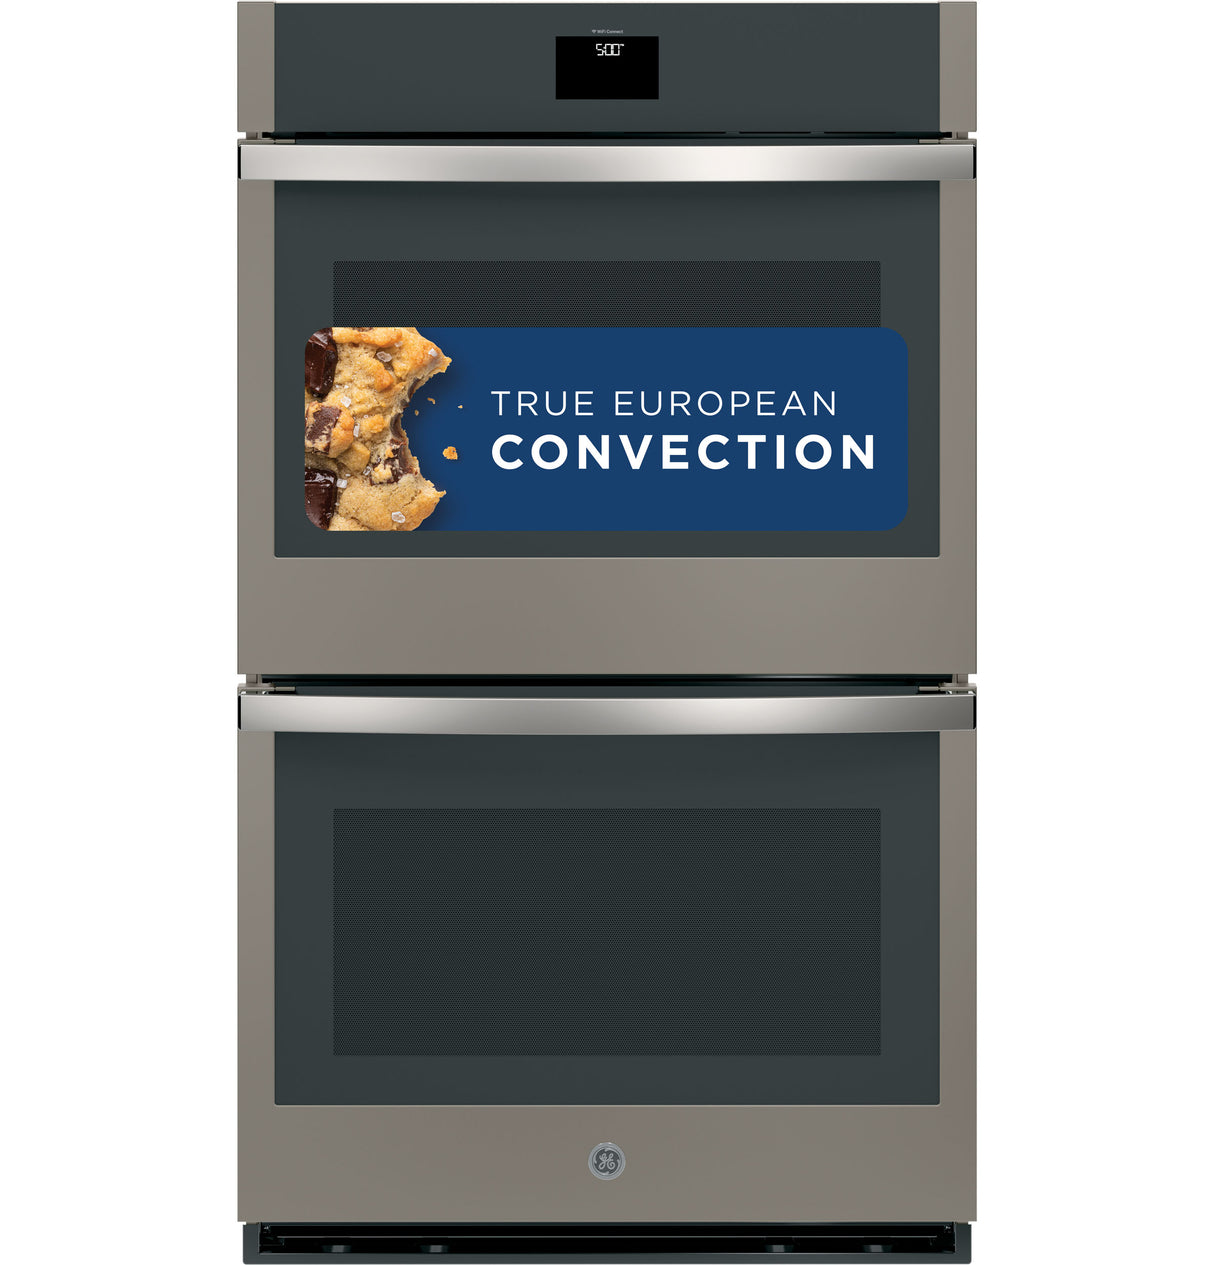 GE(R) 30" Smart Built-In Self-Clean Convection Double Wall Oven with Never Scrub Racks - (JTD5000ENES)